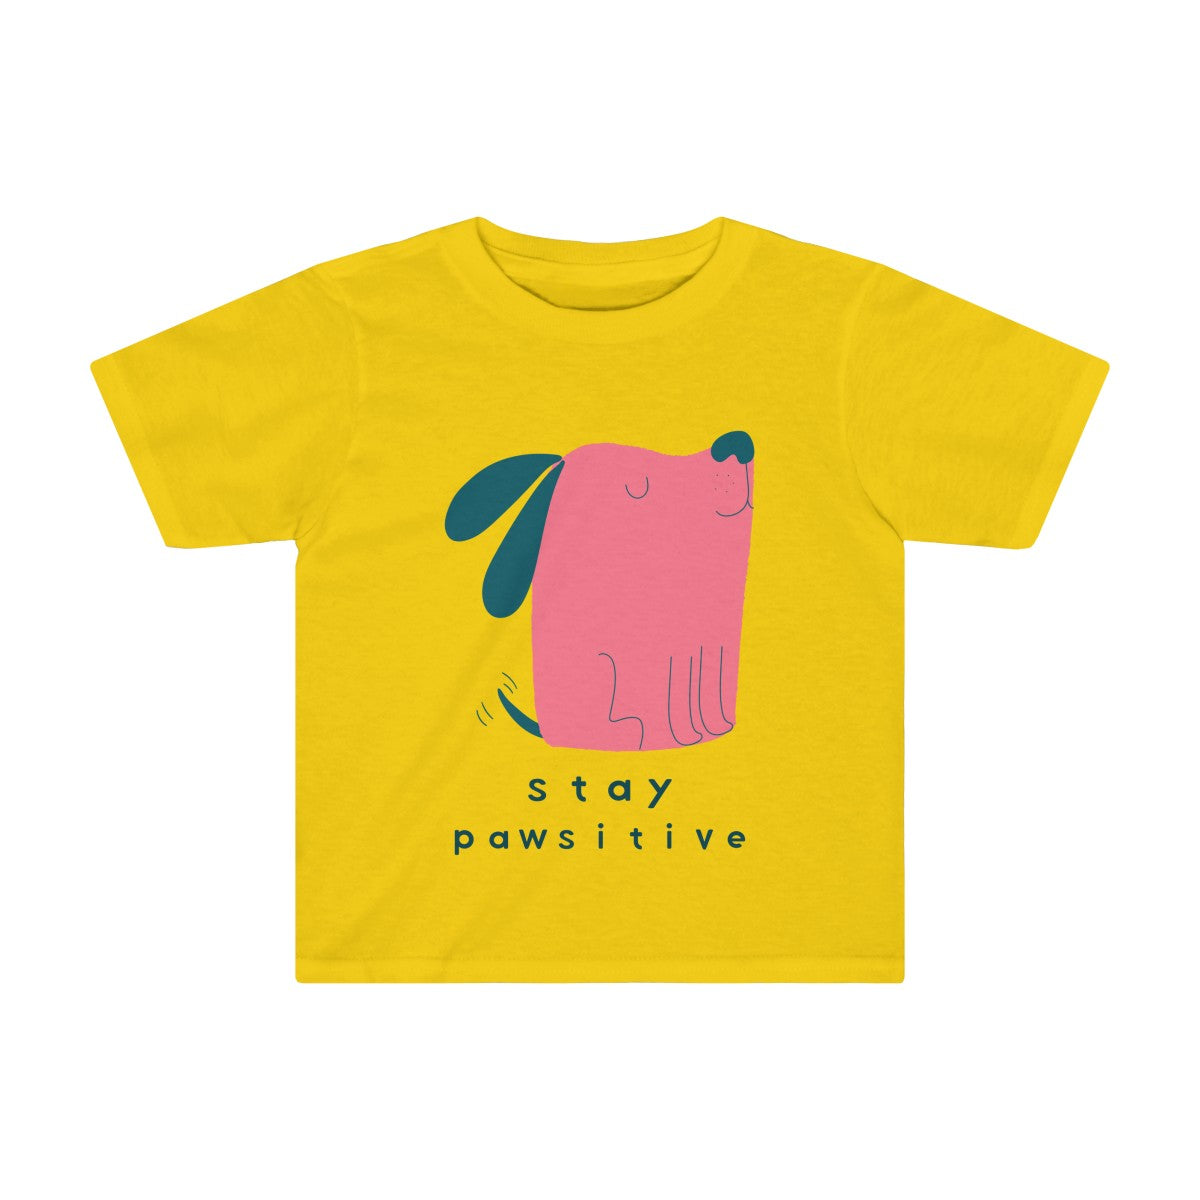 Stay Pawsitive Kids Tee-Kids clothes-PureDesignTees